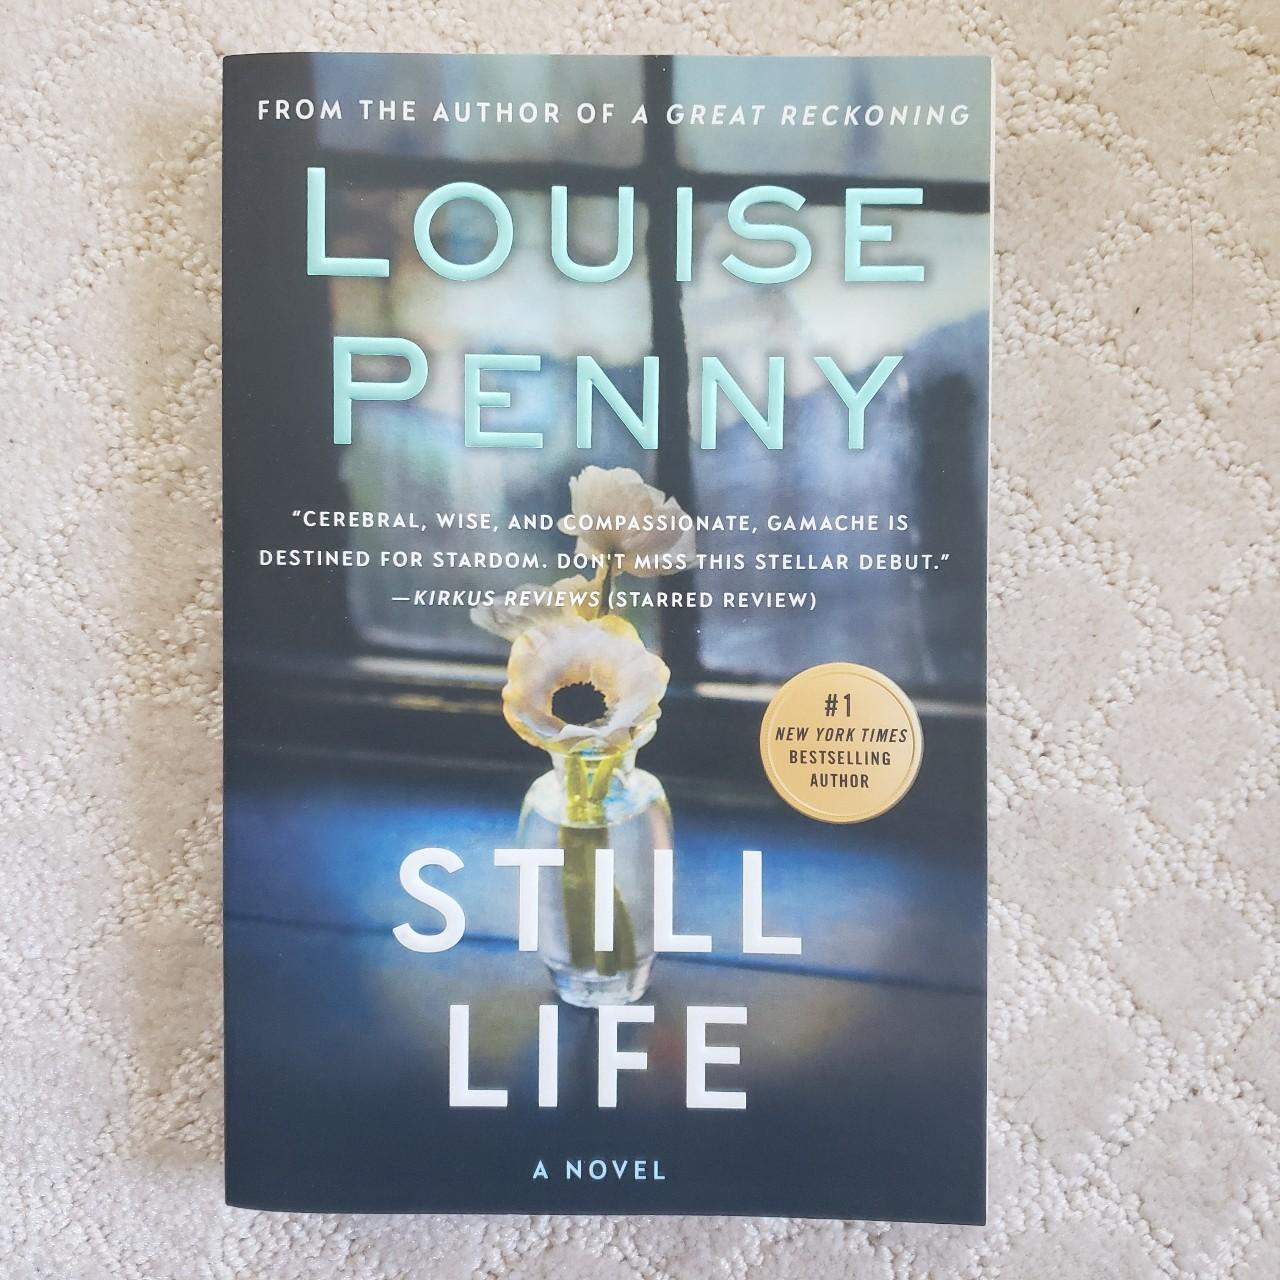 Still Life by Louise Penny